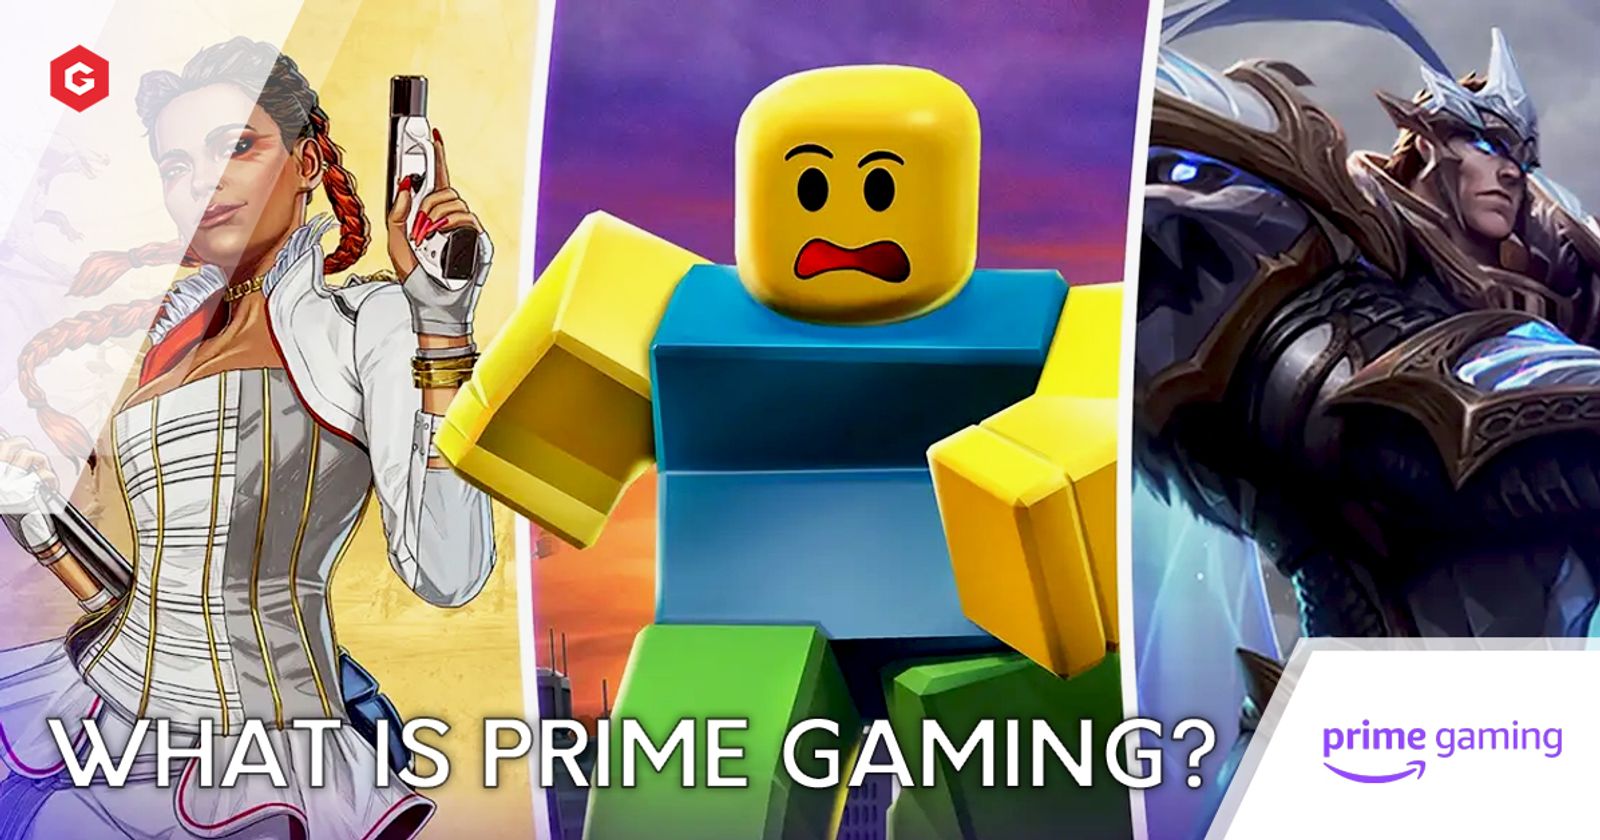 rebrands 'Twitch Prime' to 'Prime Gaming